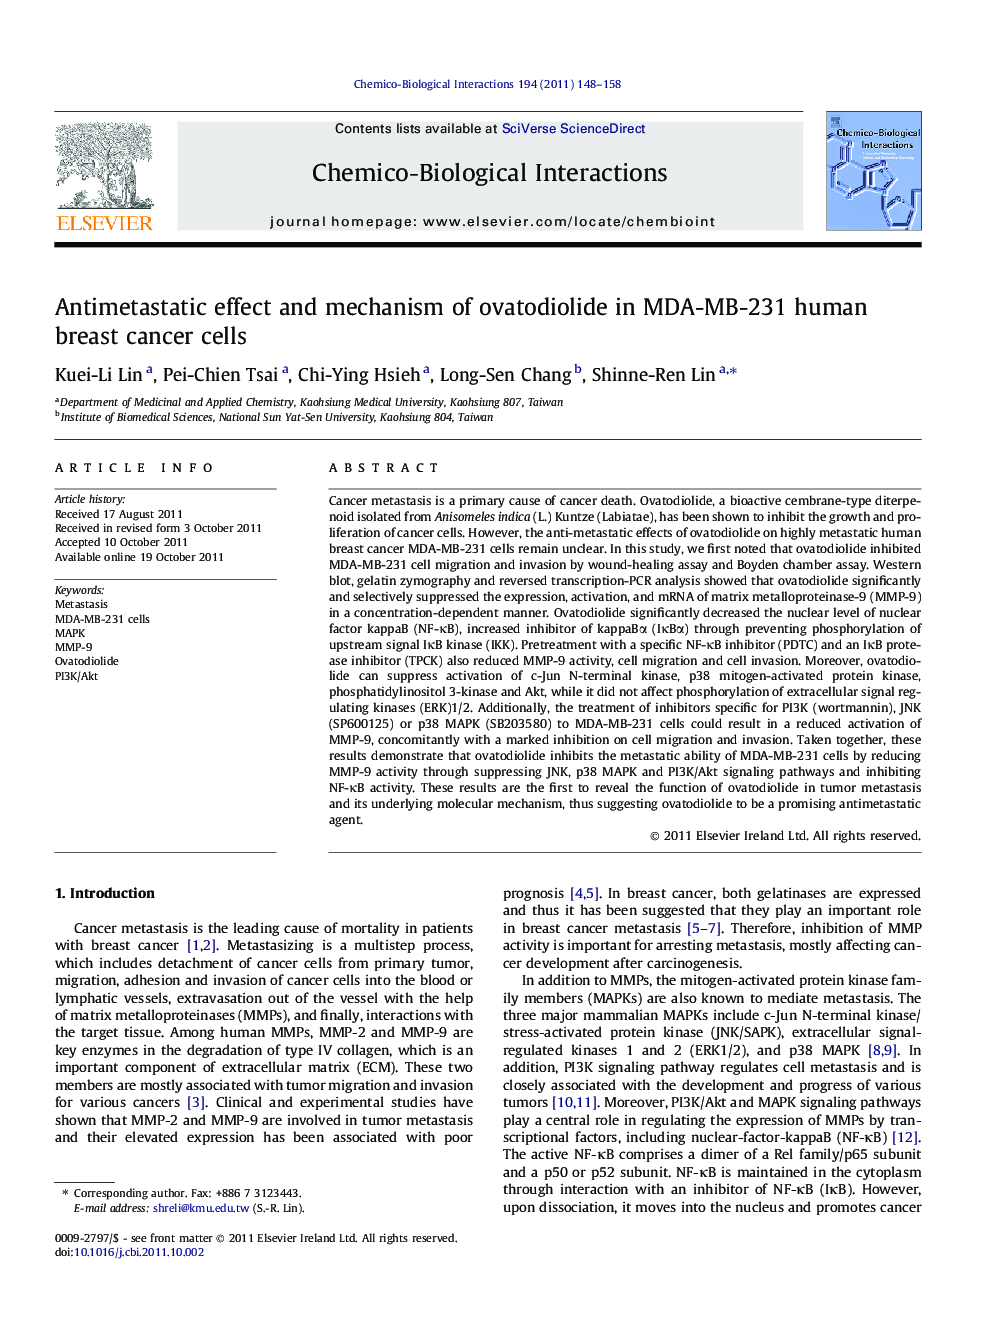 Antimetastatic effect and mechanism of ovatodiolide in MDA-MB-231 human breast cancer cells